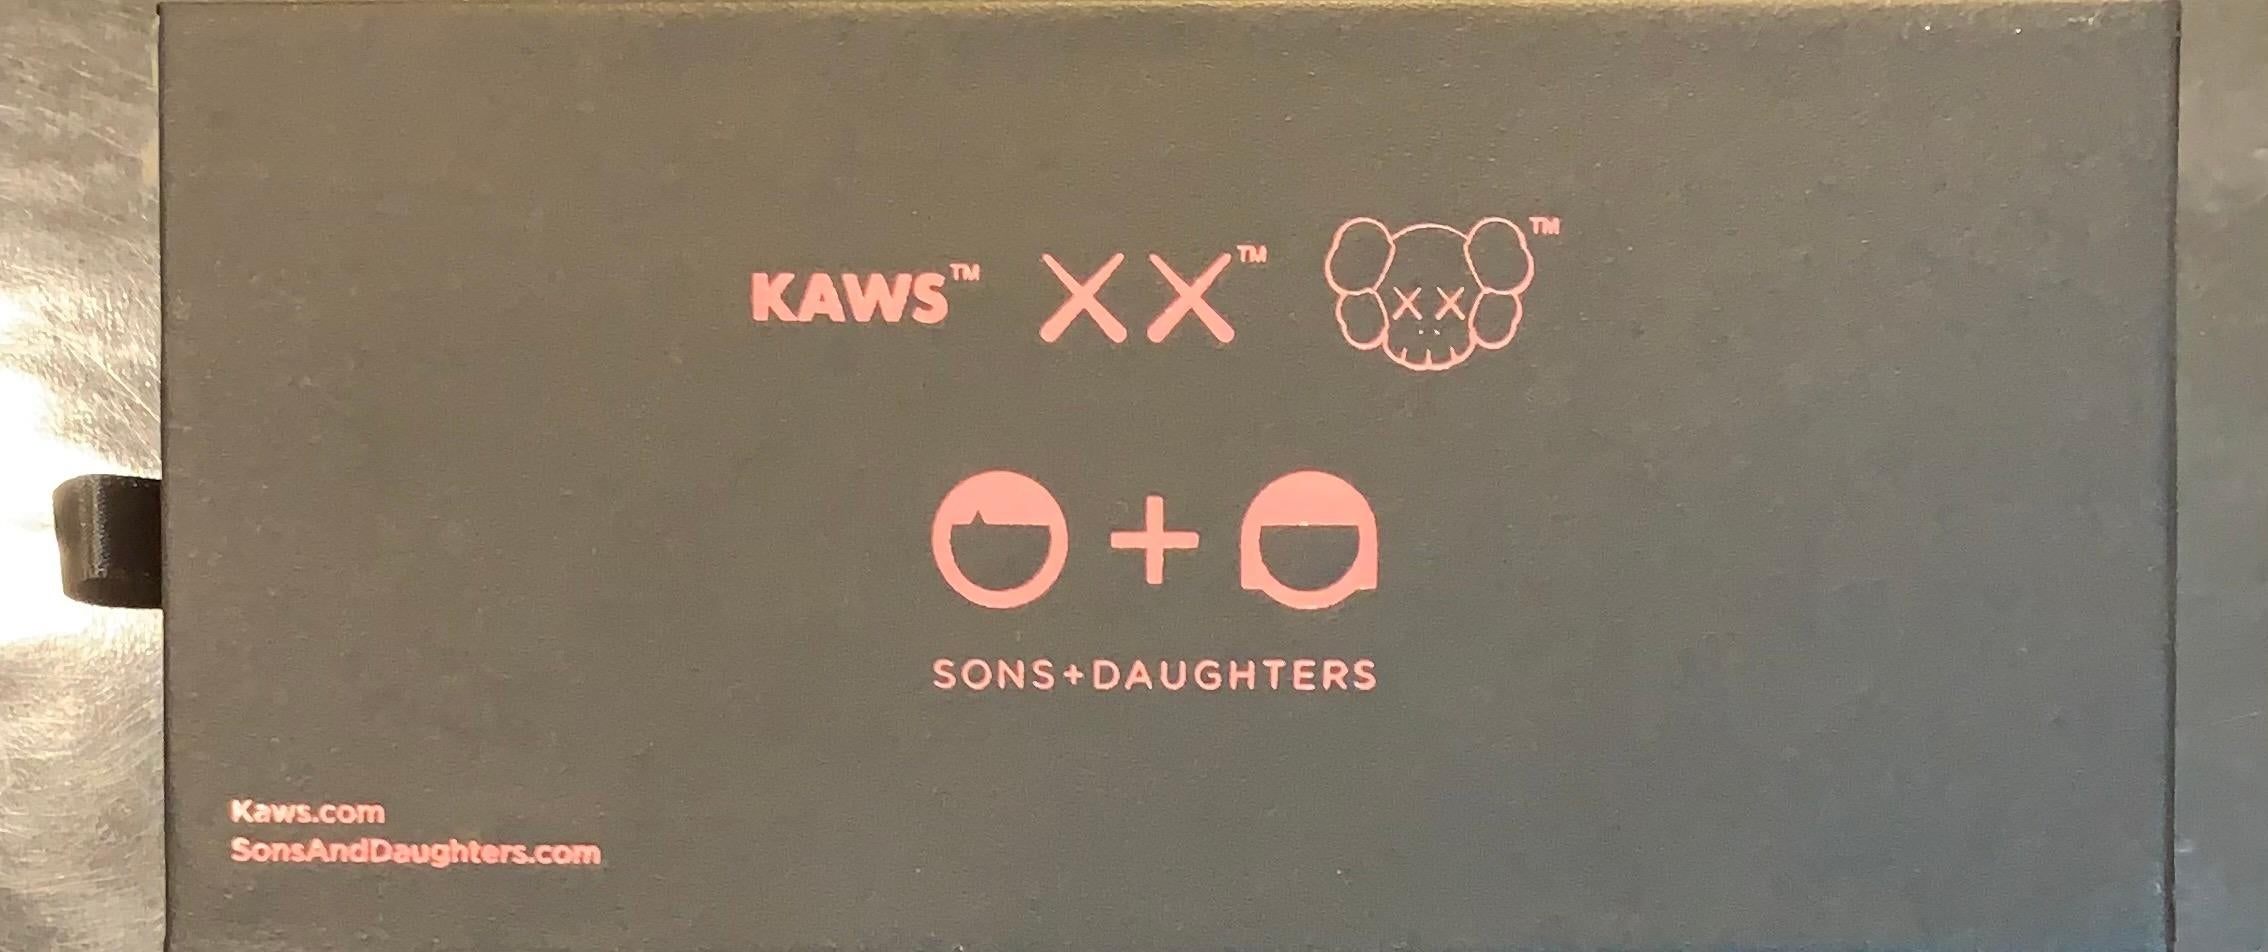 KAWS X SD PINK

The best things come in small packages. The well-loved kids eyewear brand, Sons + Daughters is proud to announce an exciting collaboration with one of the most iconic artists of this generation, KAWS, on a unique set of sunglasses